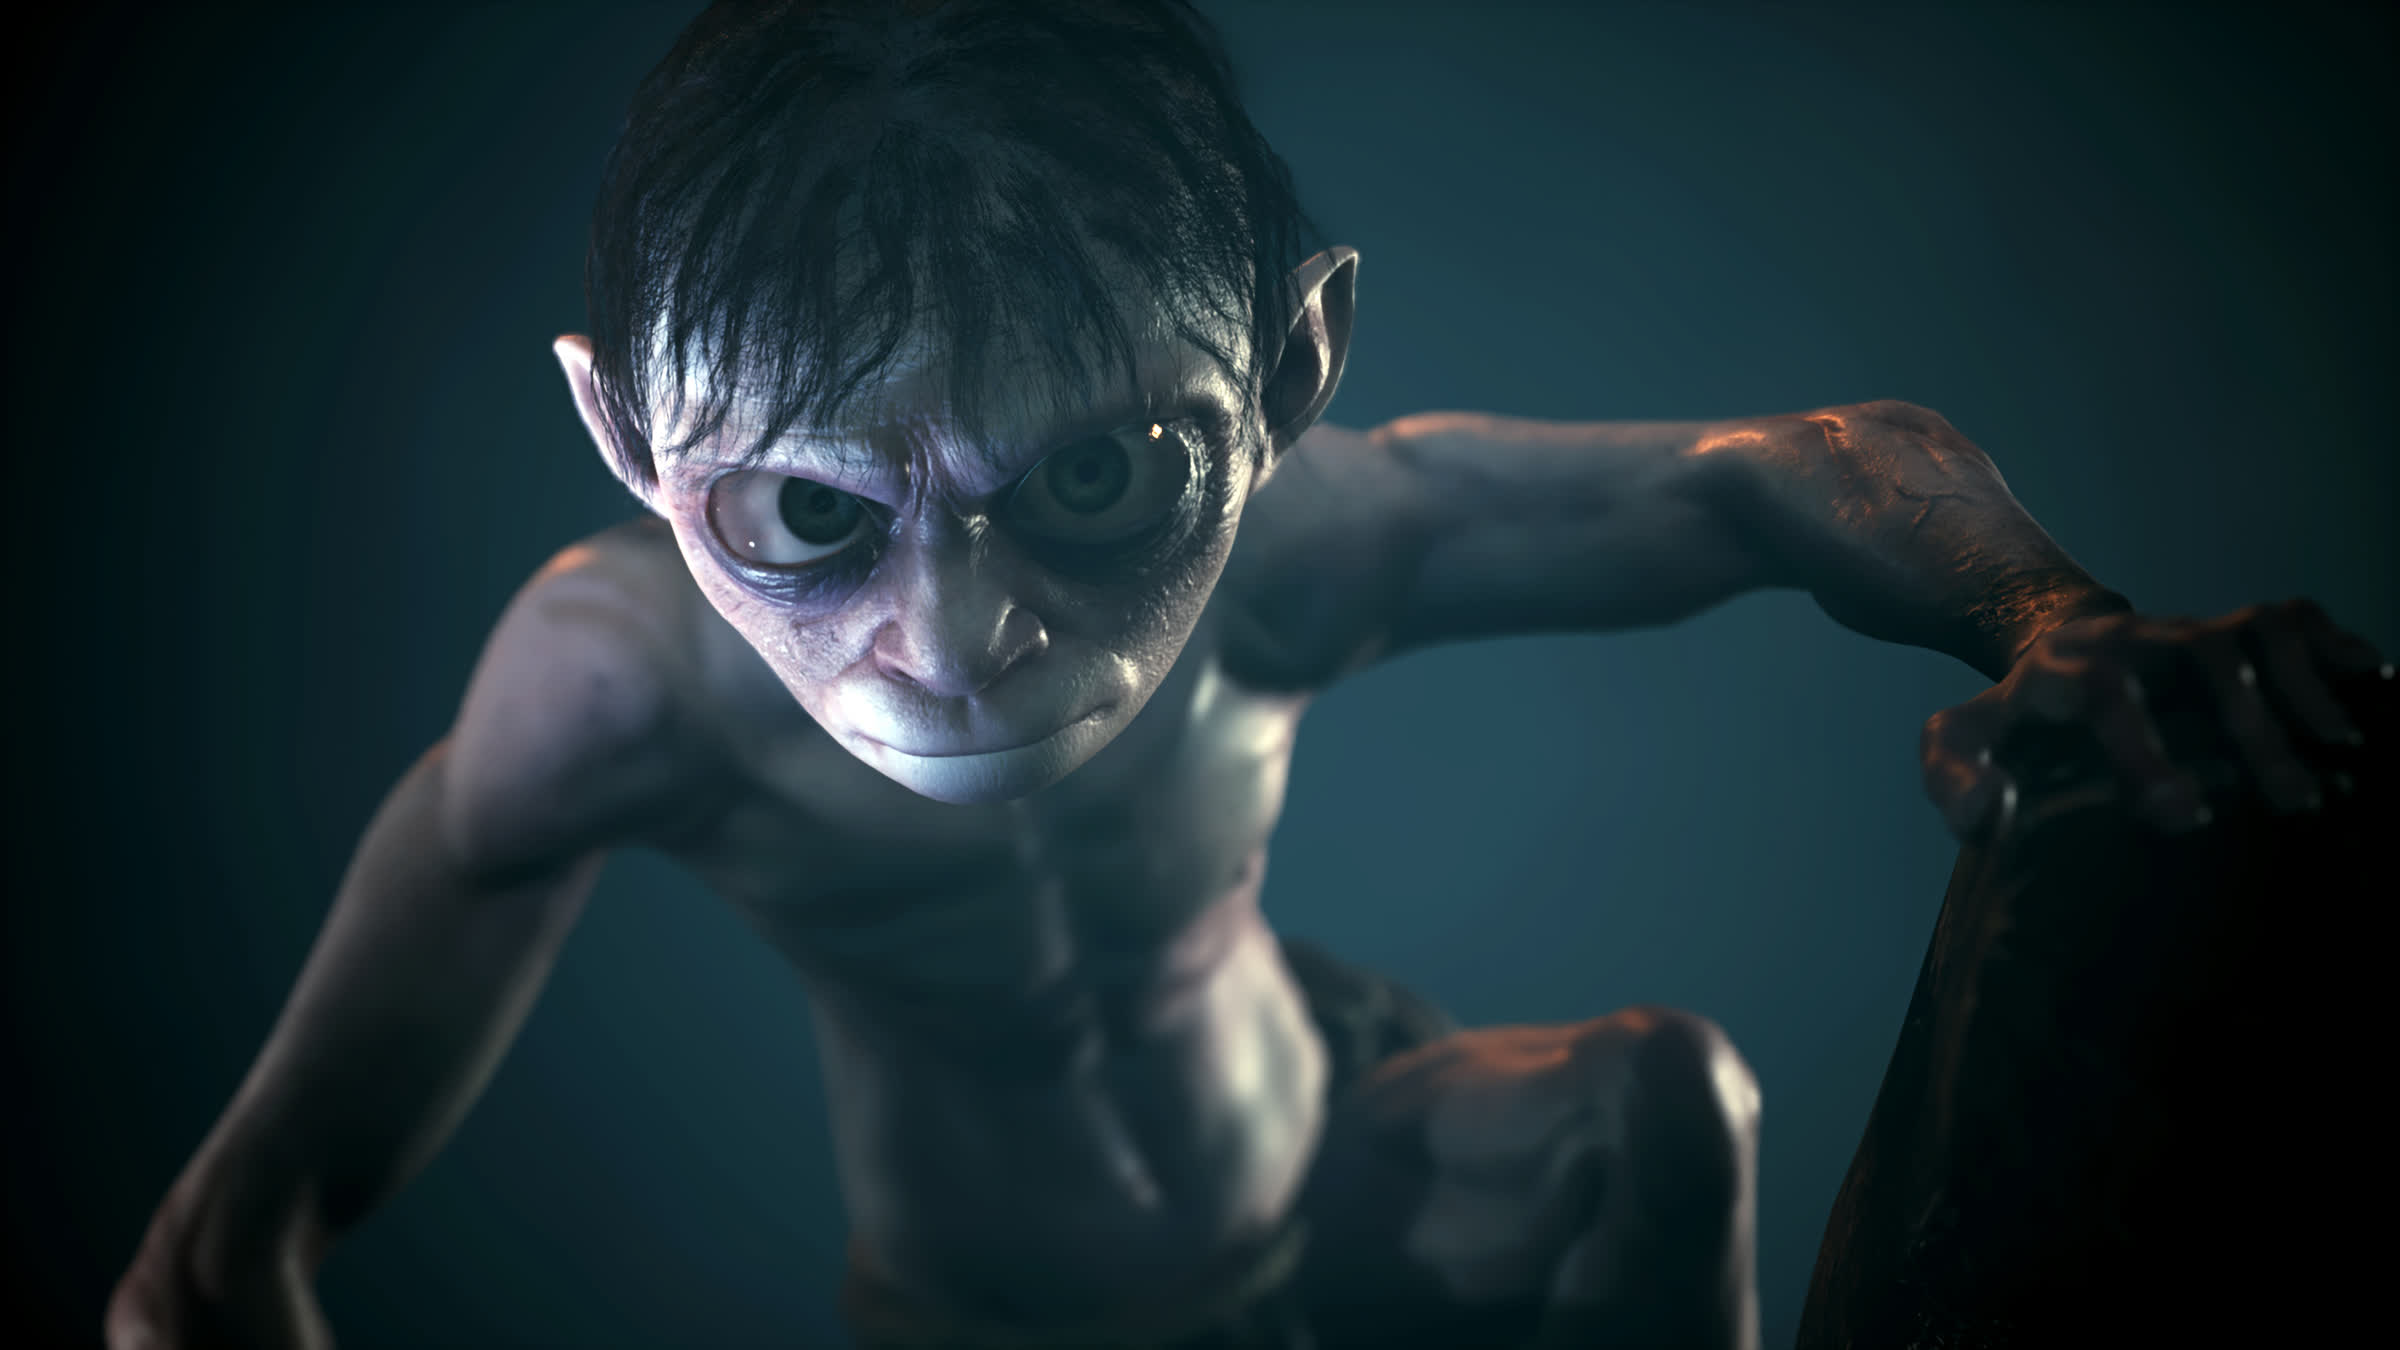 Lord of the Rings: Gollum will put the squeeze on your PC hardware